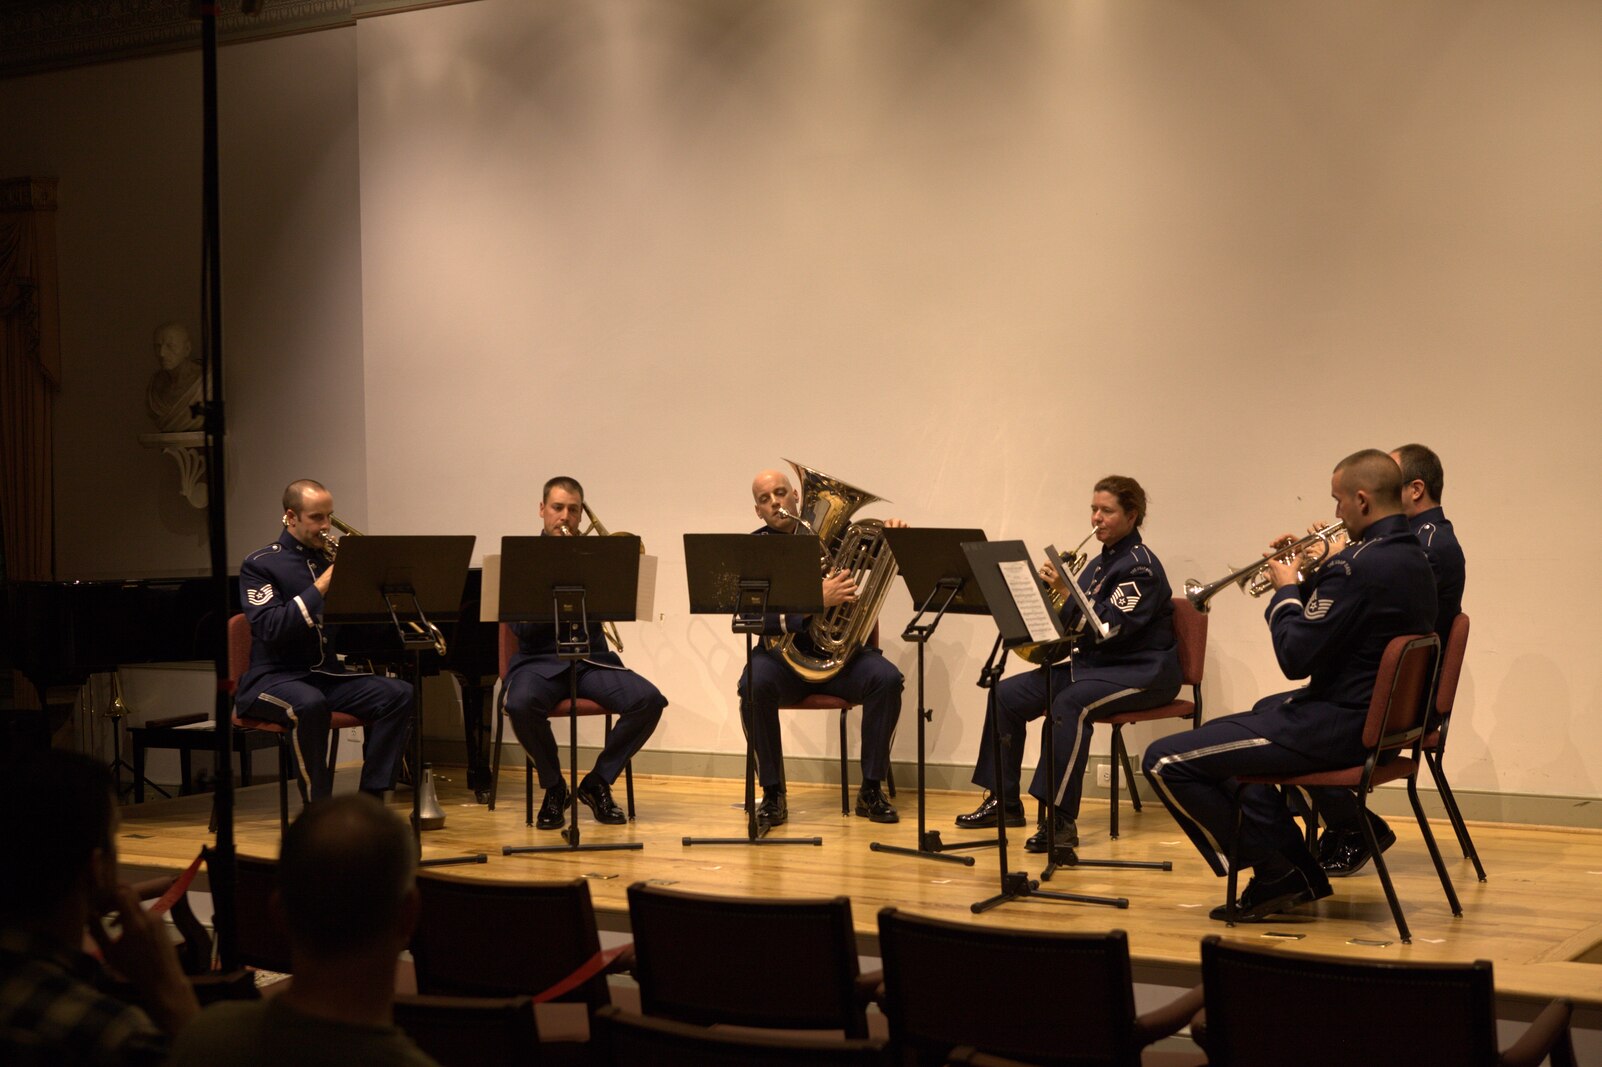 A brass sextet performs "Music for Brass Instruments" by Ingolf Dahl at a concert at The Lyceum in Old Town Alexandria on November 6, 2014. (U.S. Air Force photo by Tech. Sgt. Matthew Shipes)